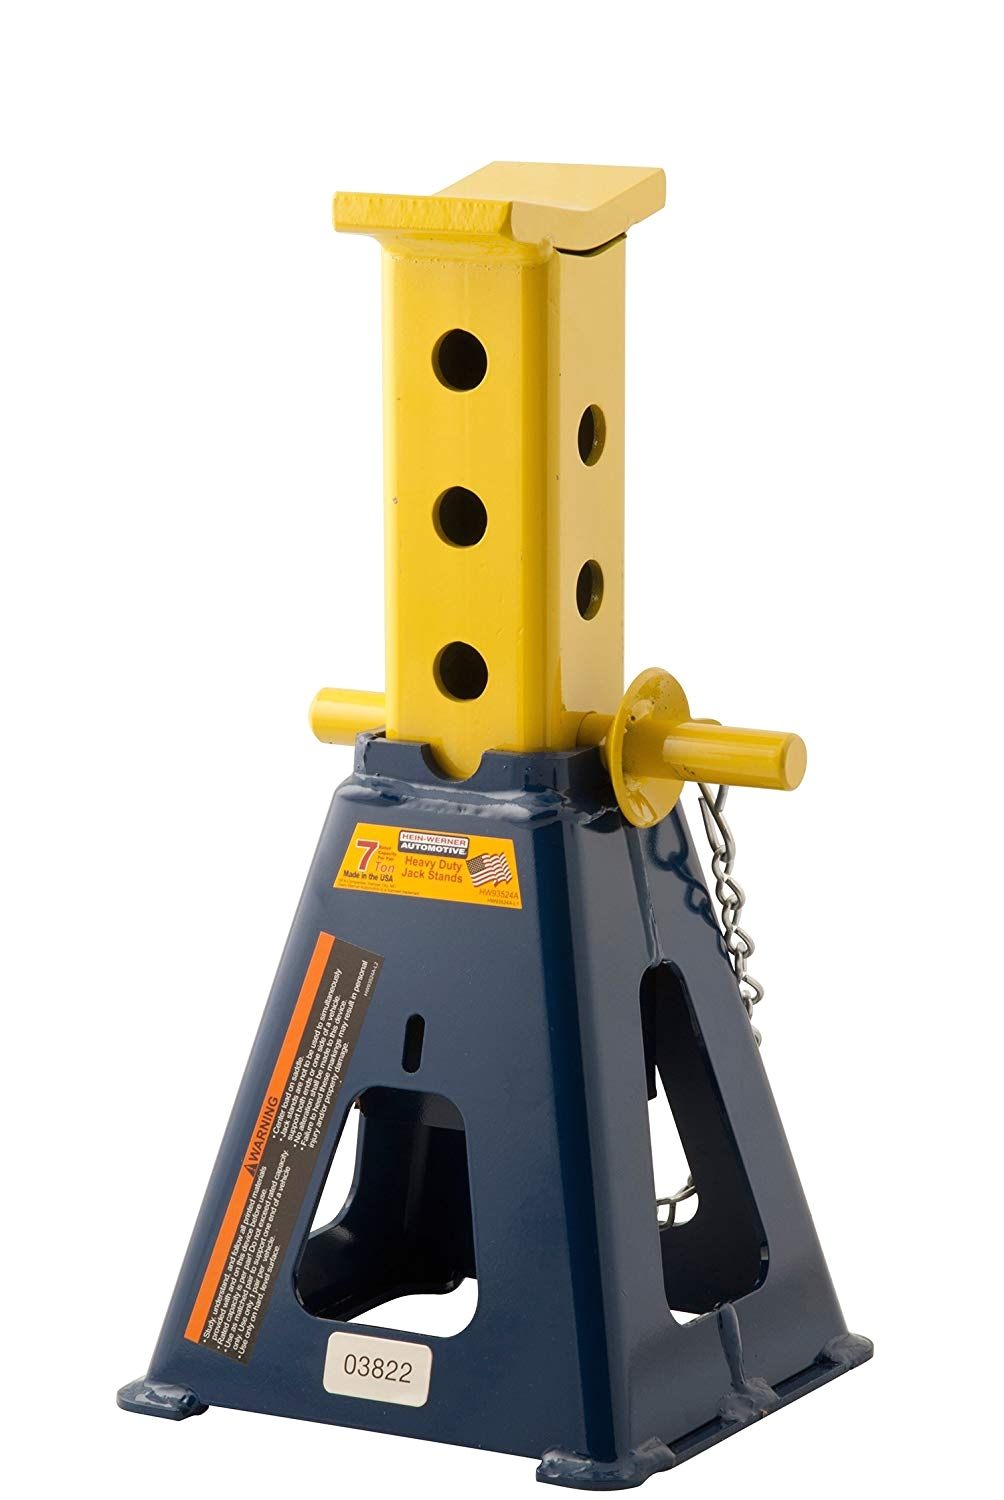 amazon com hein werner hw93524a blue forklift stand 7 ton capacity automotive